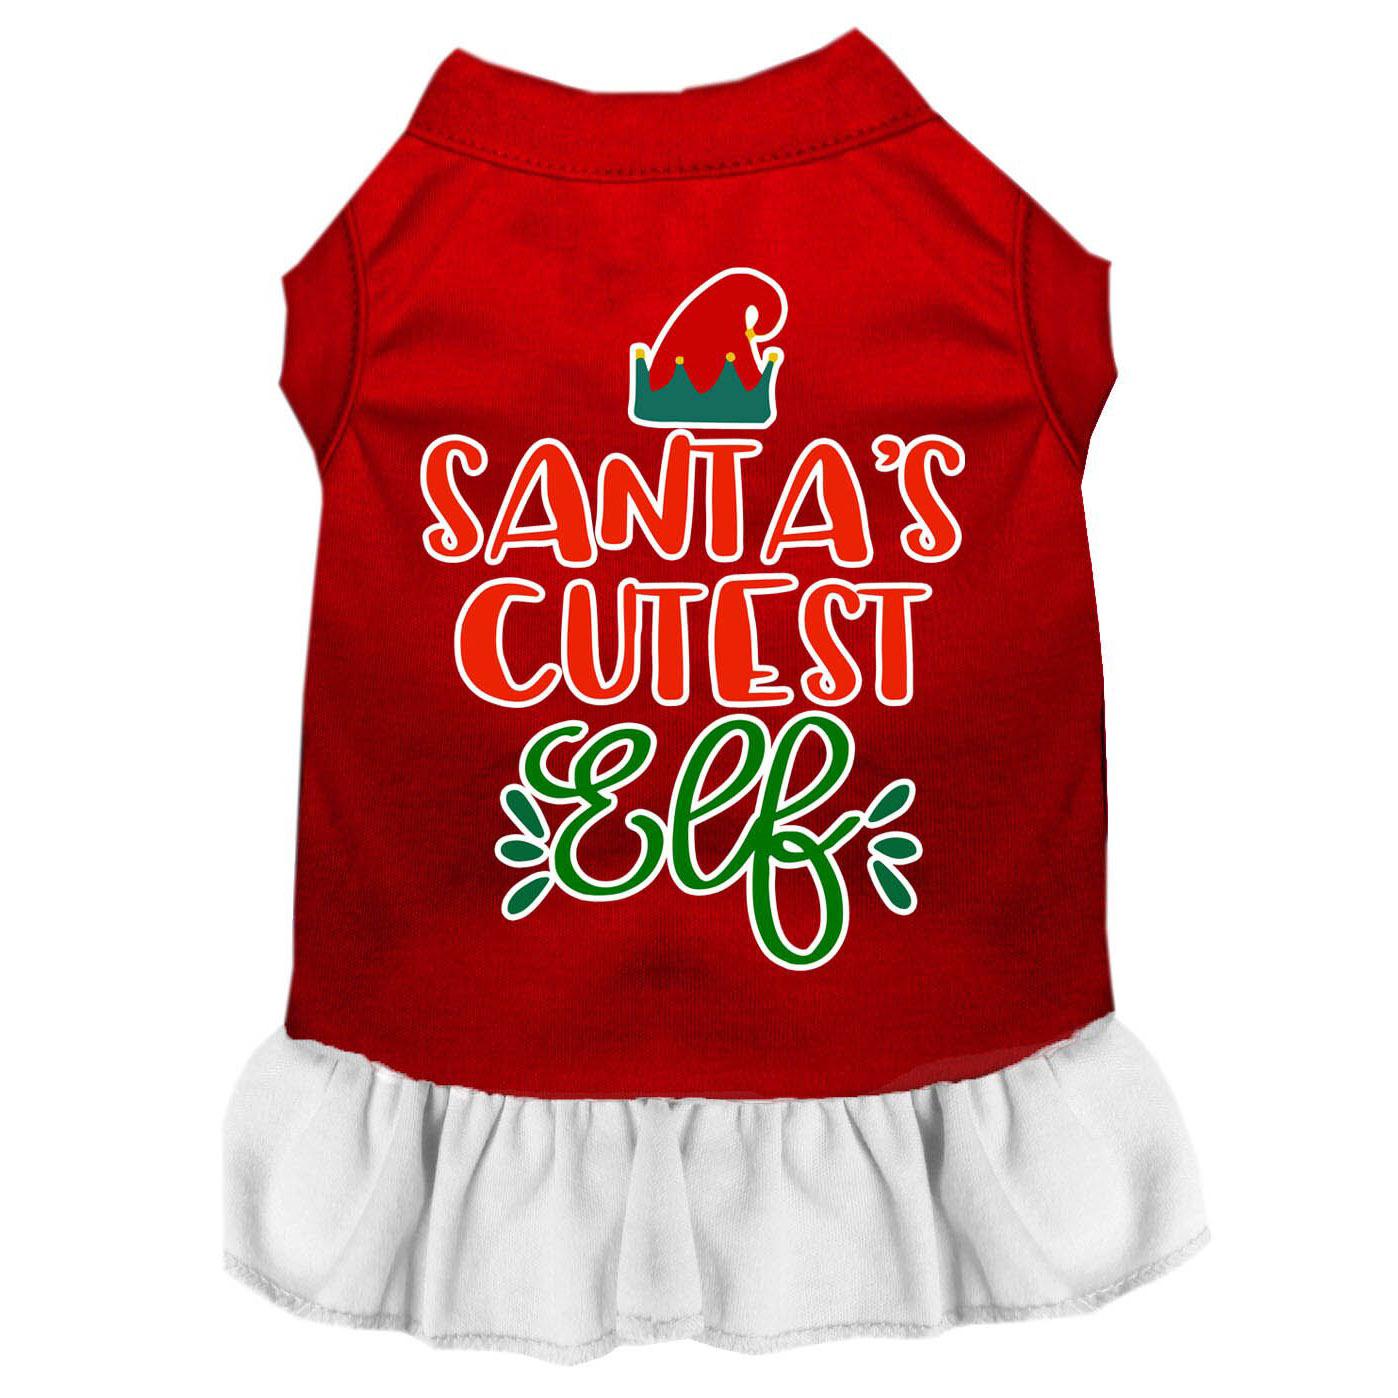 Mirage Santa's Cutest Elf Dog Dress - Red and White